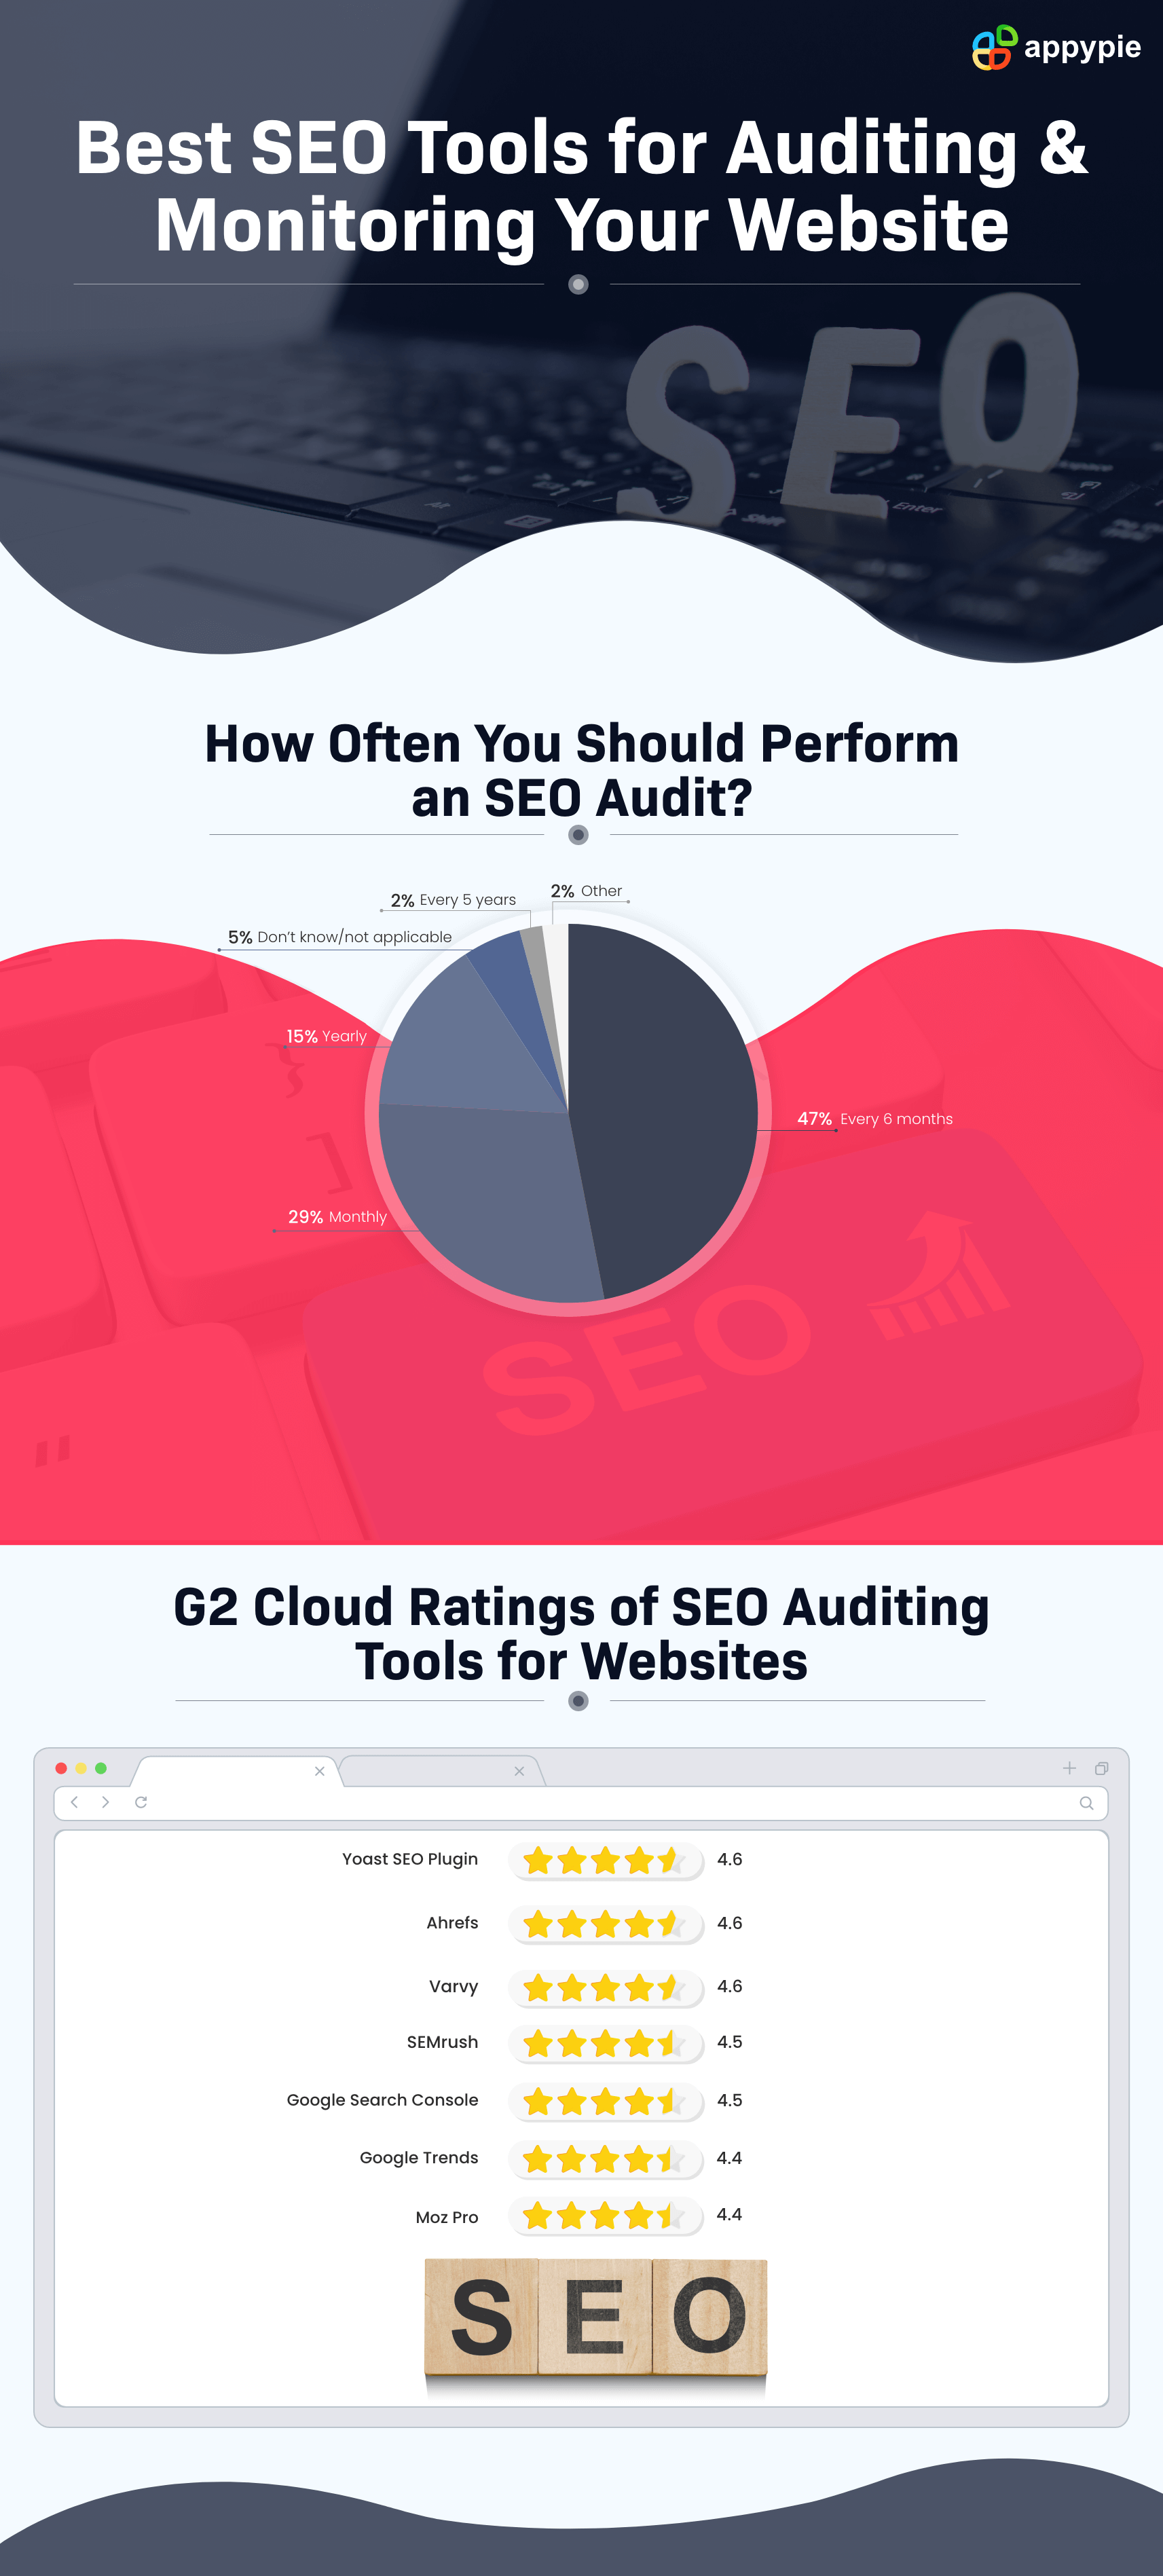 Best SEO Tools for Auditing & Monitoring Your Website - Appy Pie